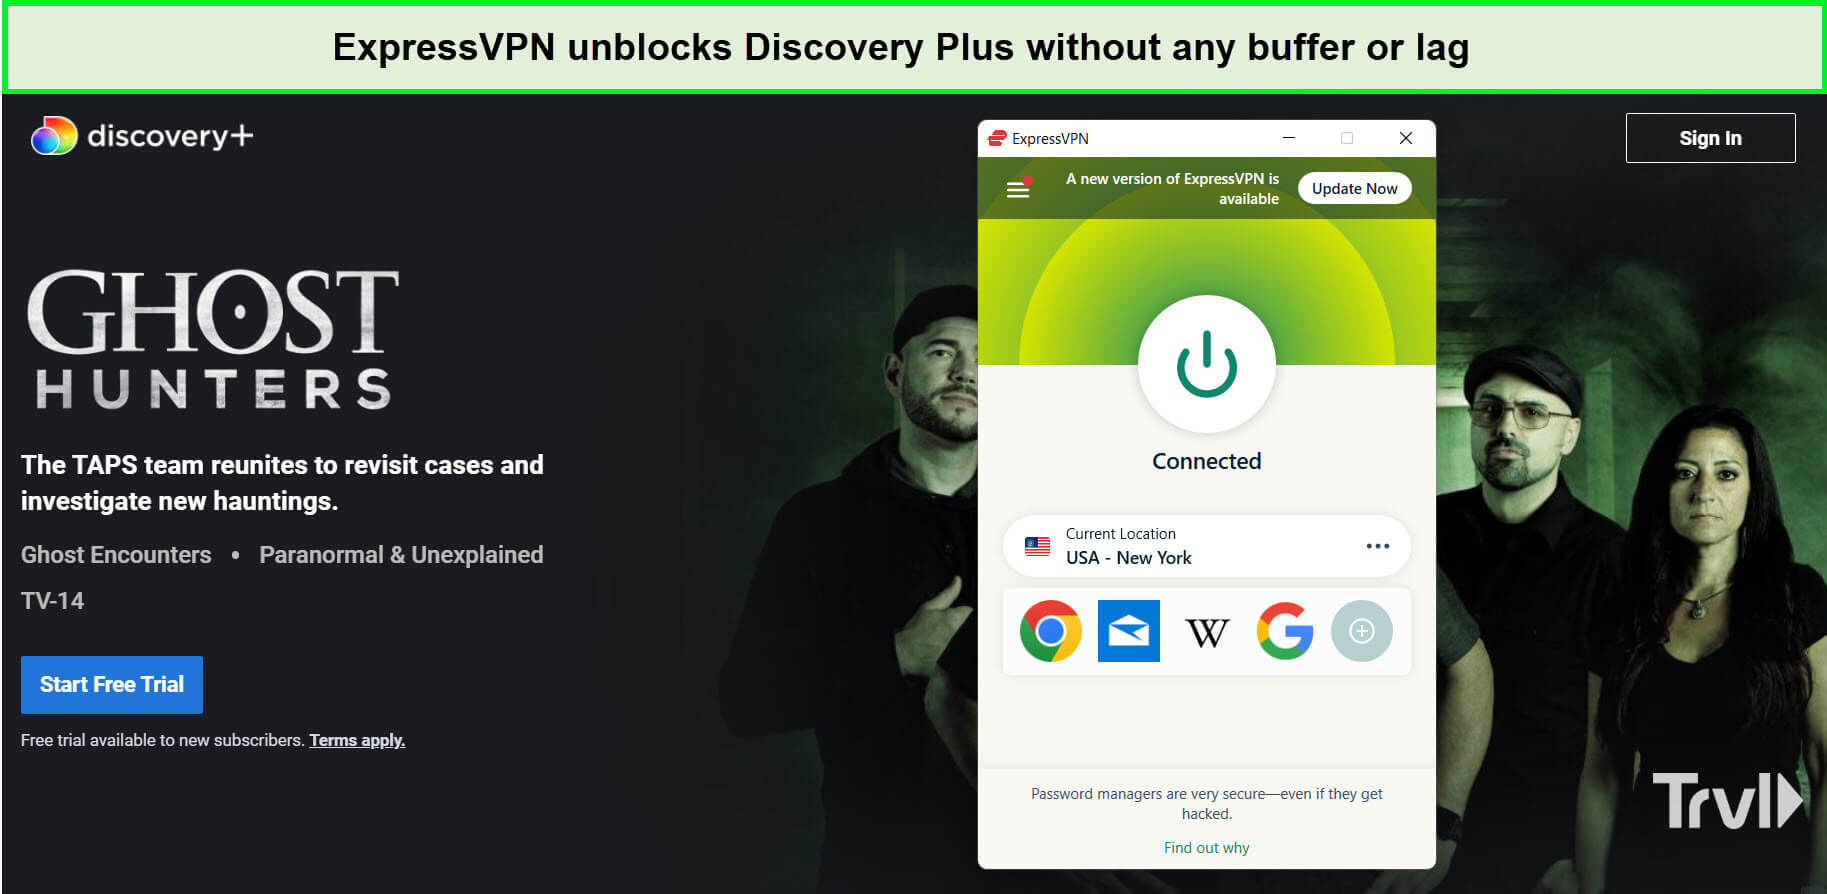 expressvpn-unblocks-ghost-hunters-on-discovery-plus-in-Netherlands